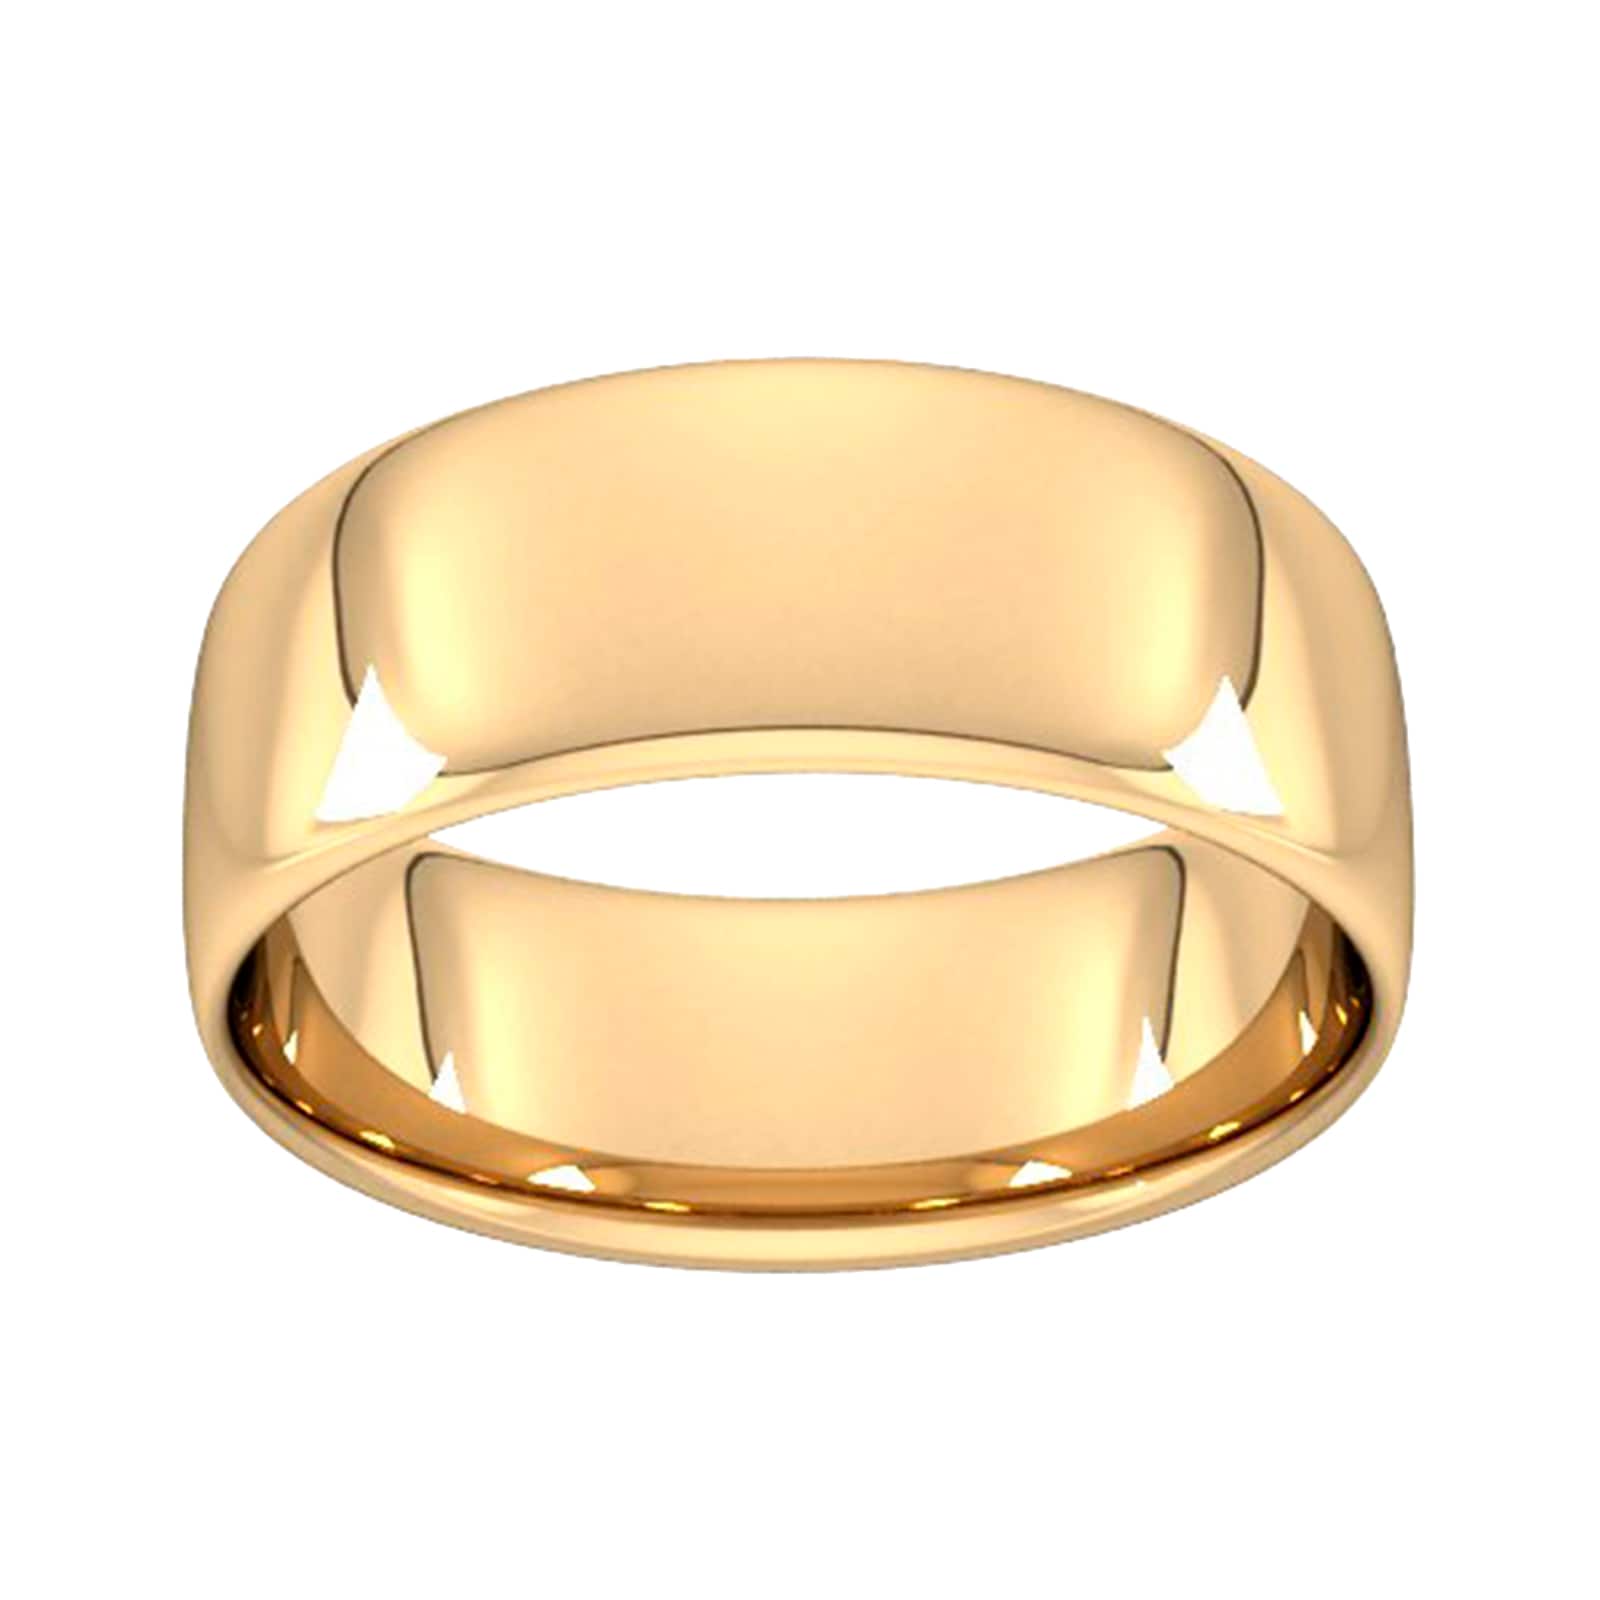 8mm Slight Court Standard Wedding Ring In 18 Carat Yellow Gold - Ring Size I